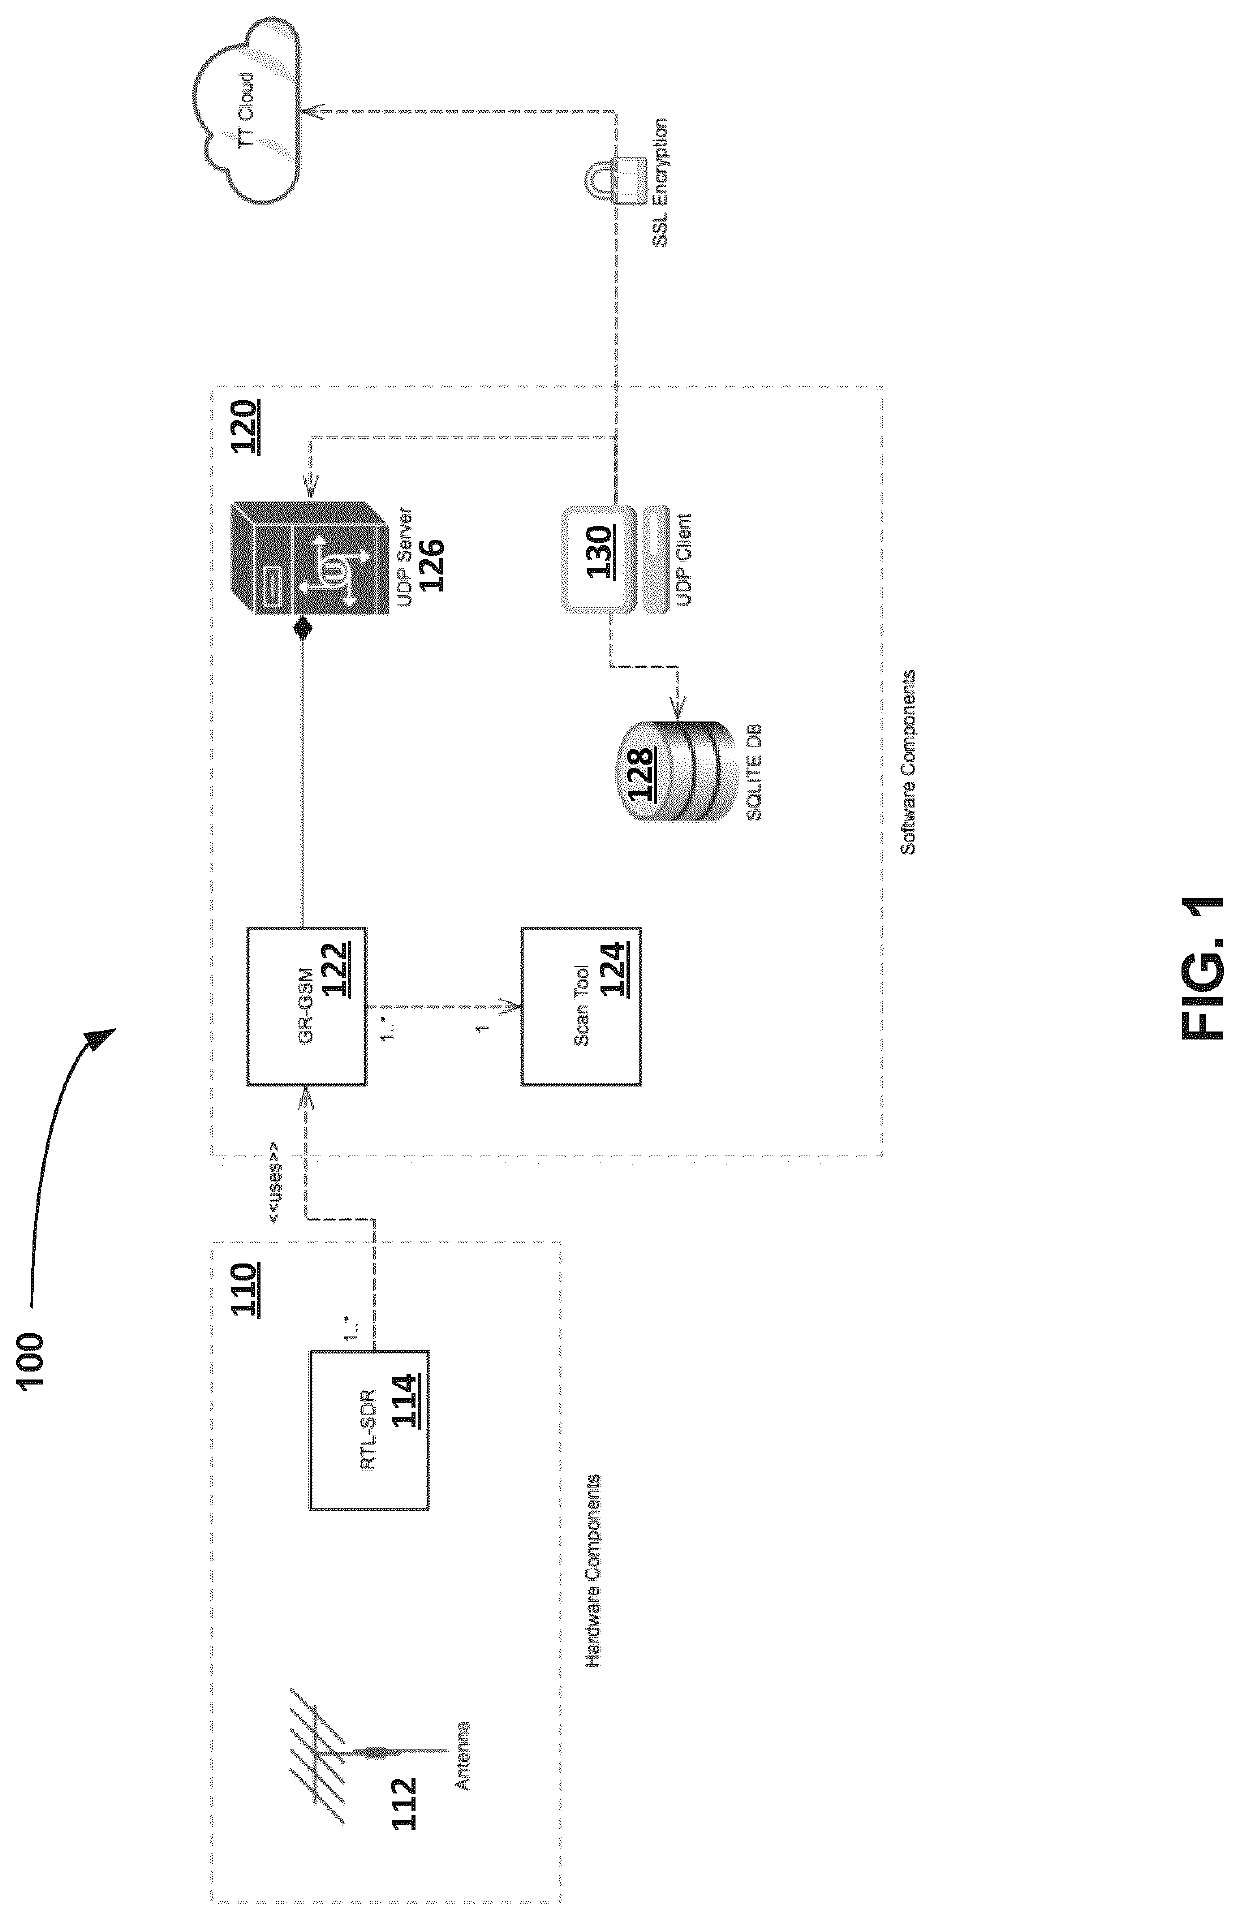 System and method of tracking a mobile device